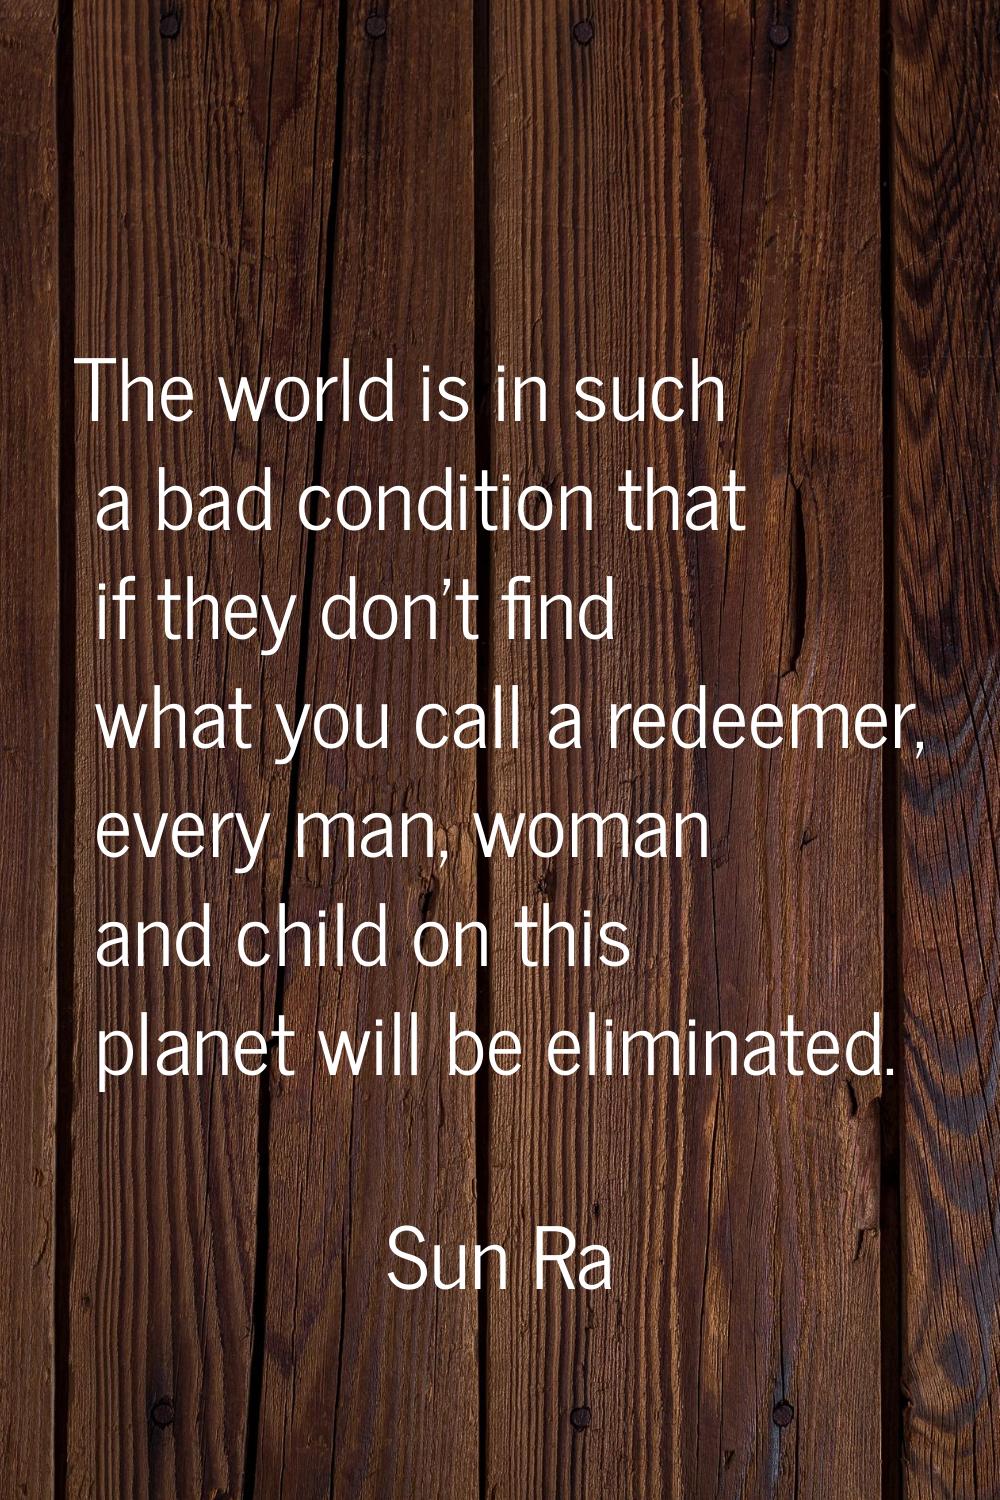 The world is in such a bad condition that if they don't find what you call a redeemer, every man, w